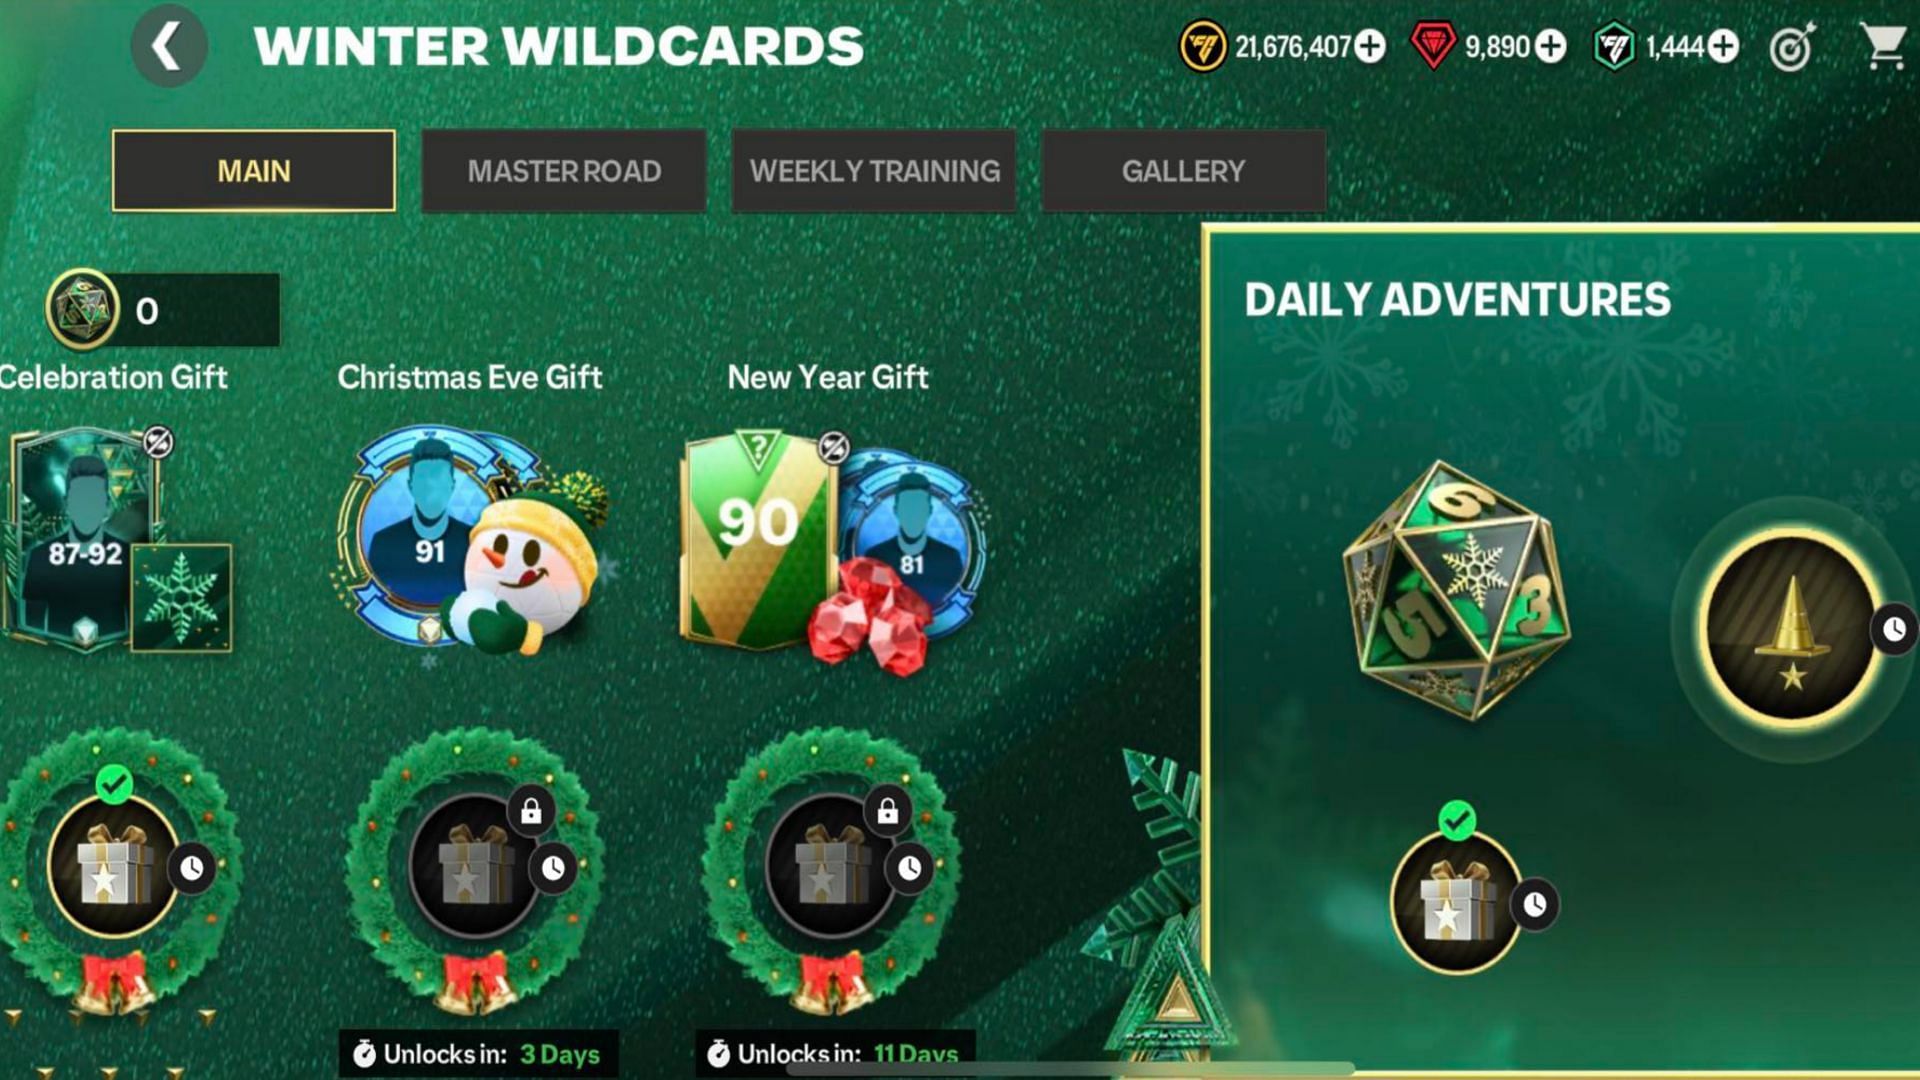 Main Chapter in Winter Wildcards promo (Image via EA Sports)